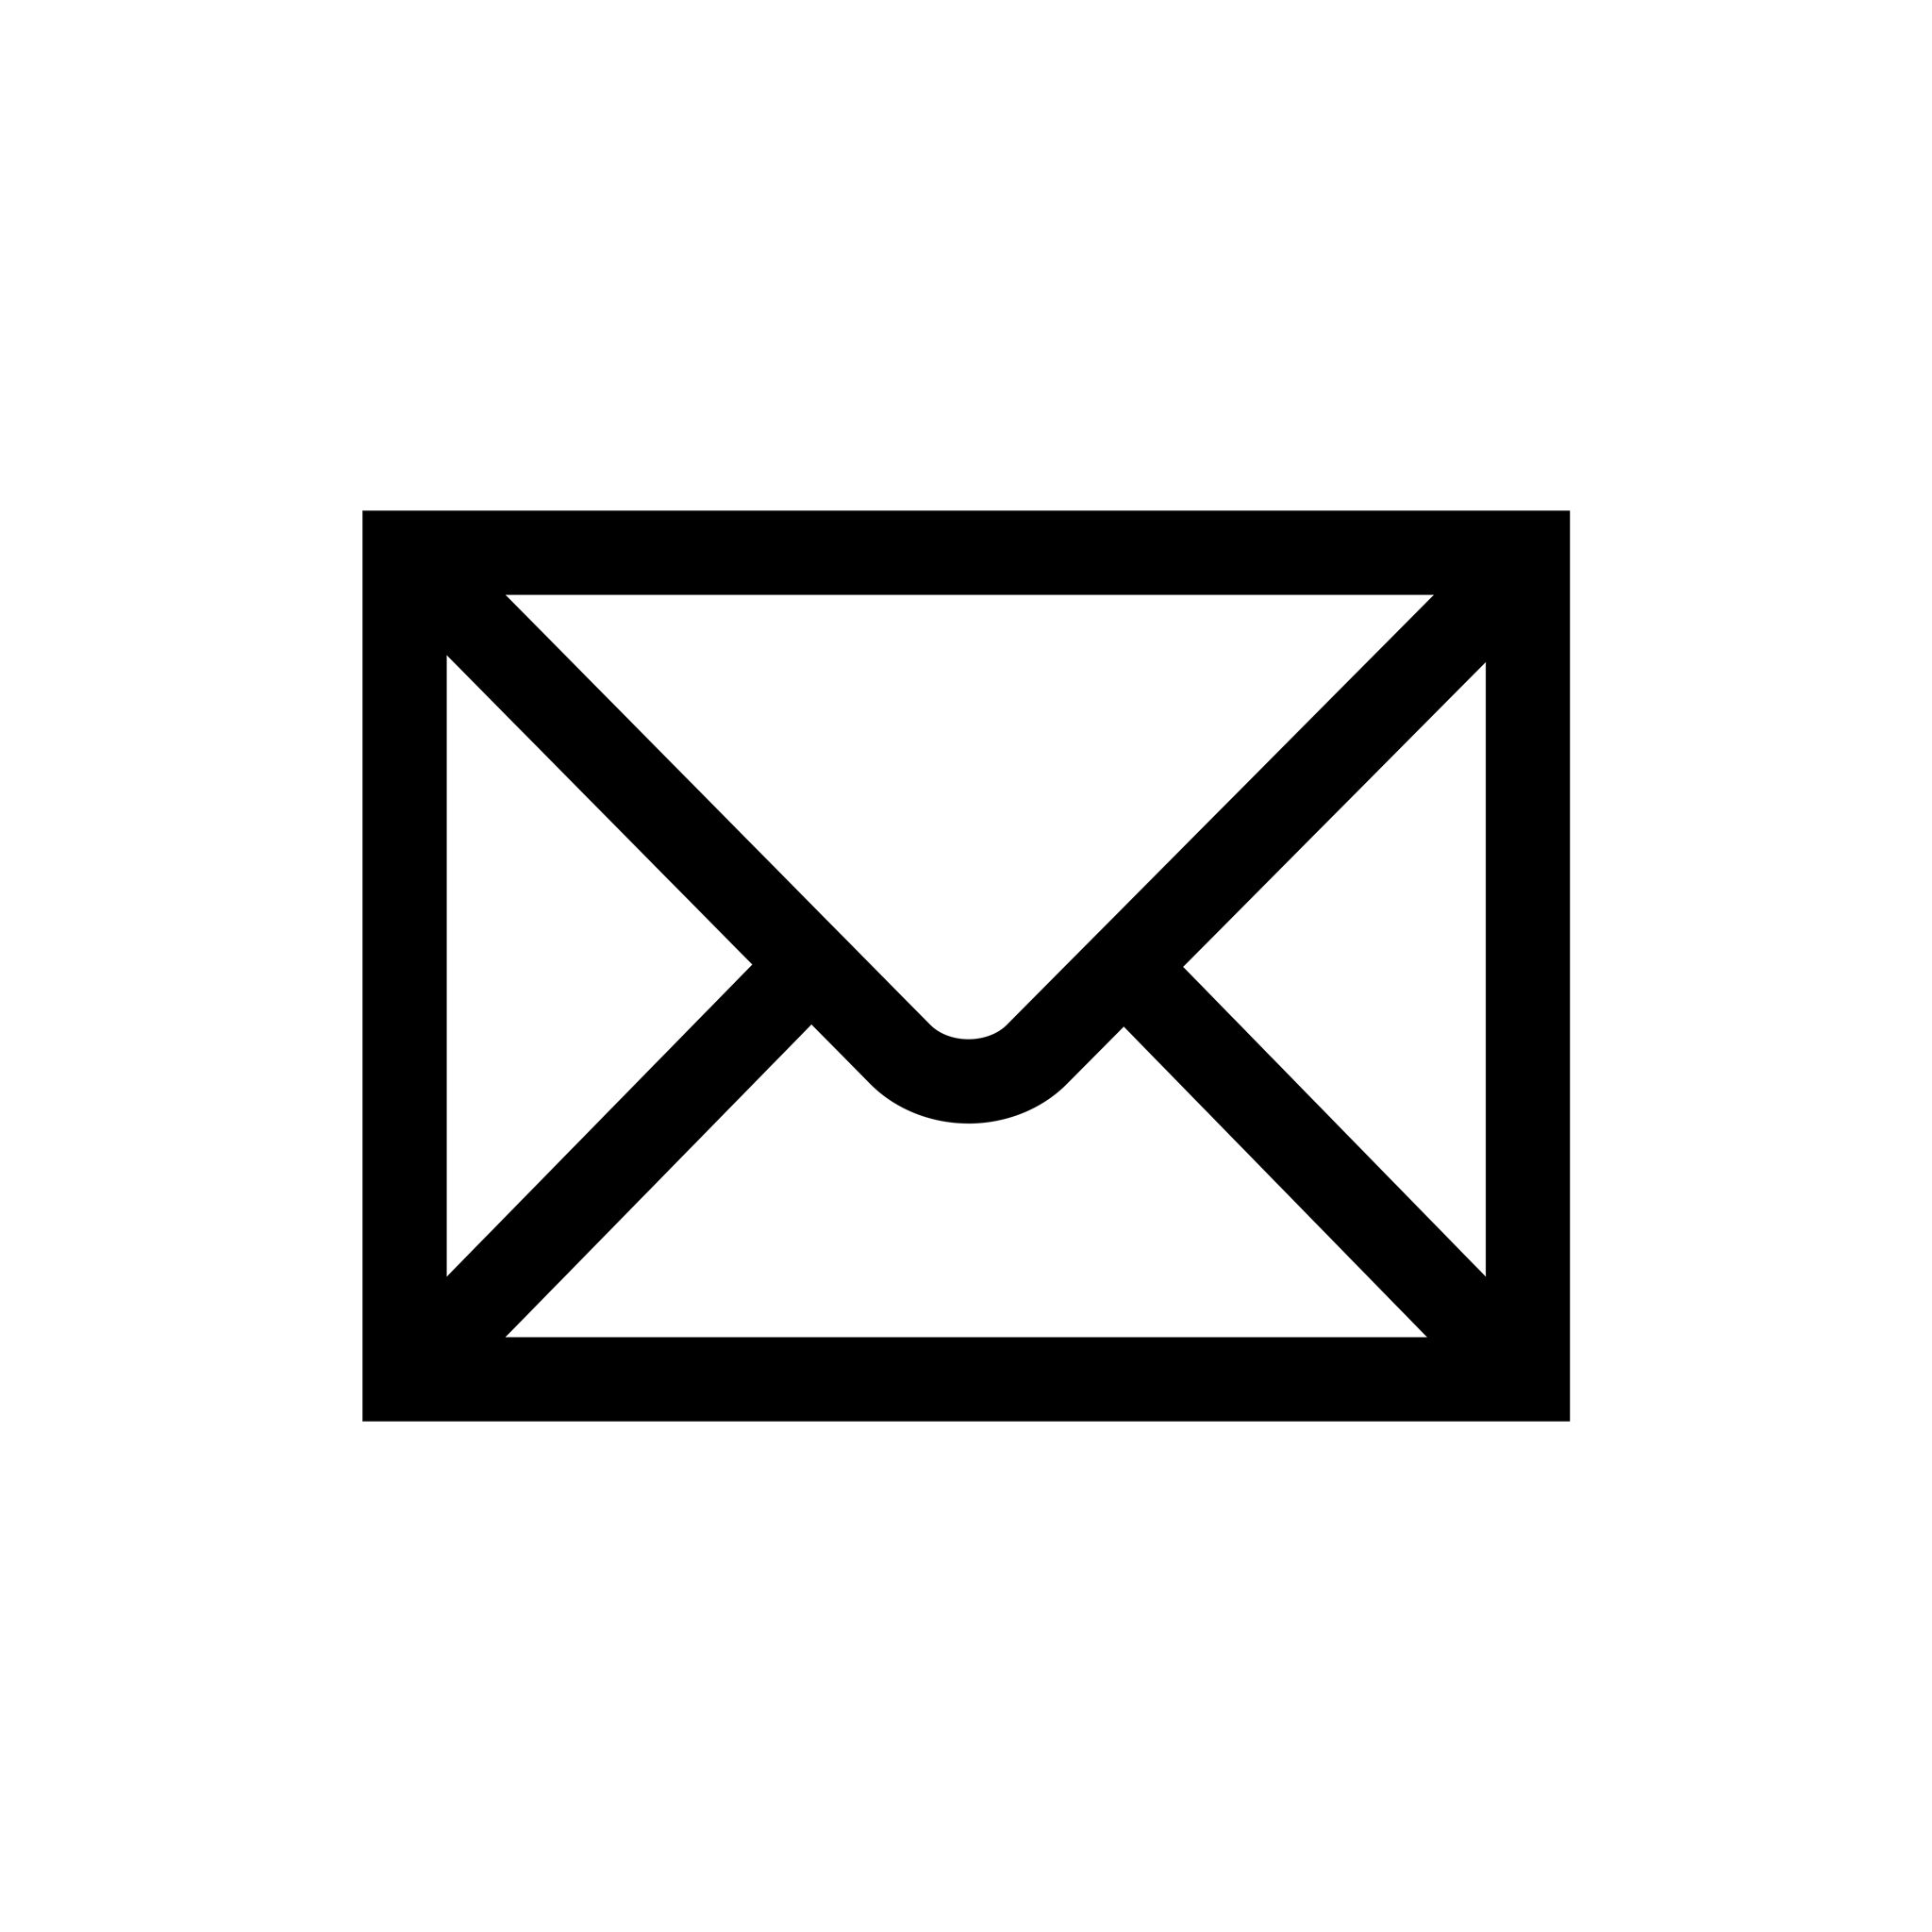 Email icon with blue arrow vector 01 - Web Icons free download